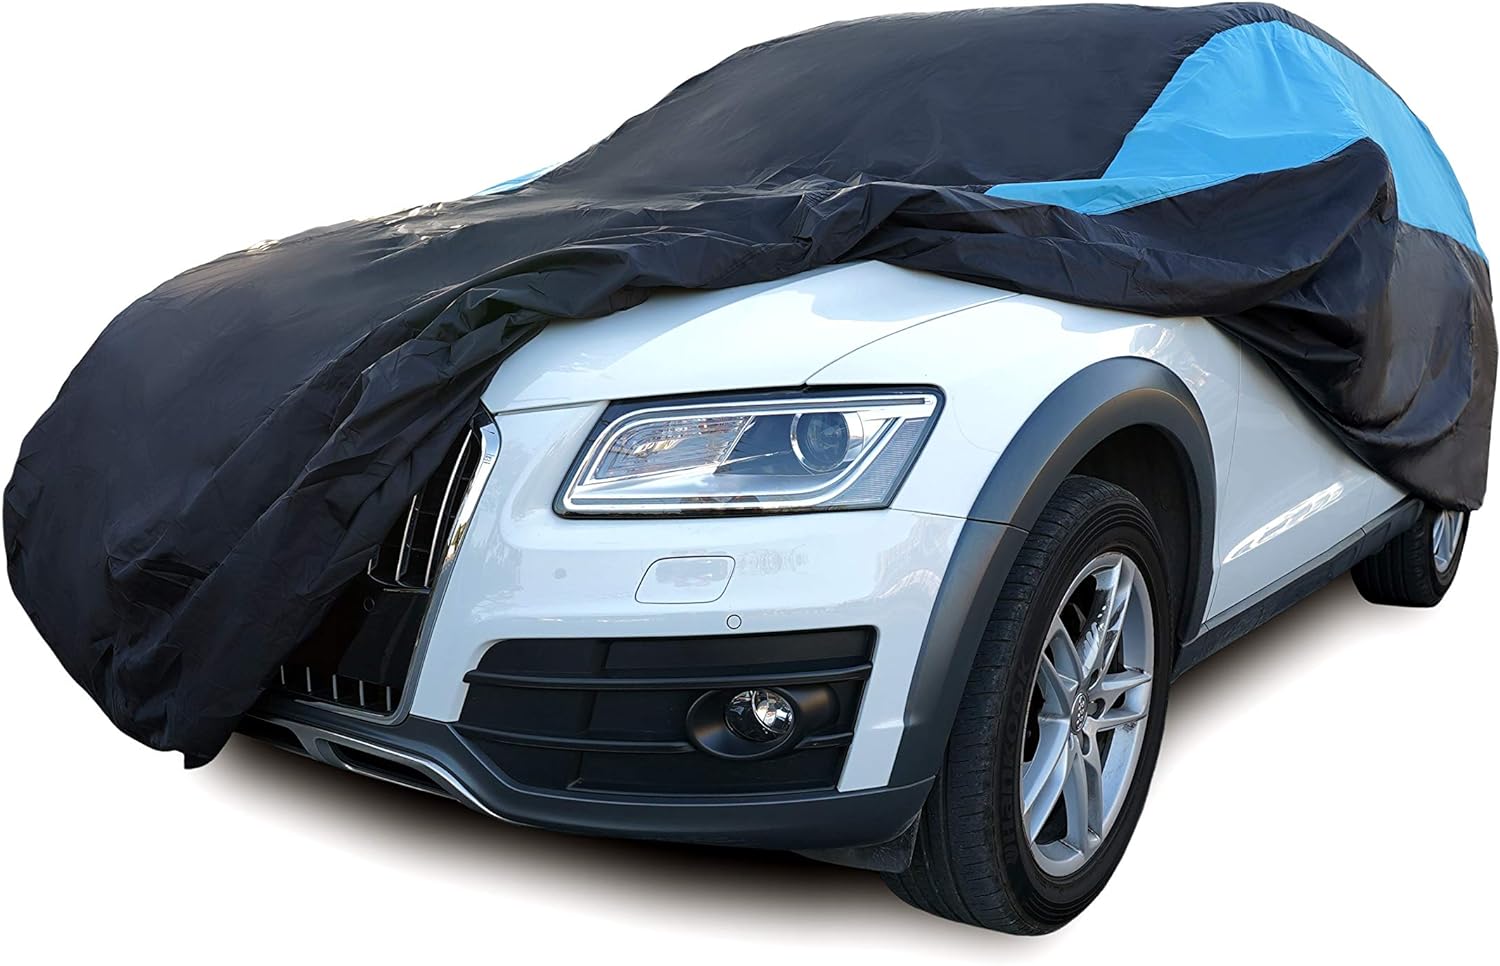 Waterproof Car Cover All Weather Snowproof UV Protection Windproof Outdoor Full SUV Car Cover, Universal Fit for SUV (Fit SUV Length 191-201 inch, Blue)